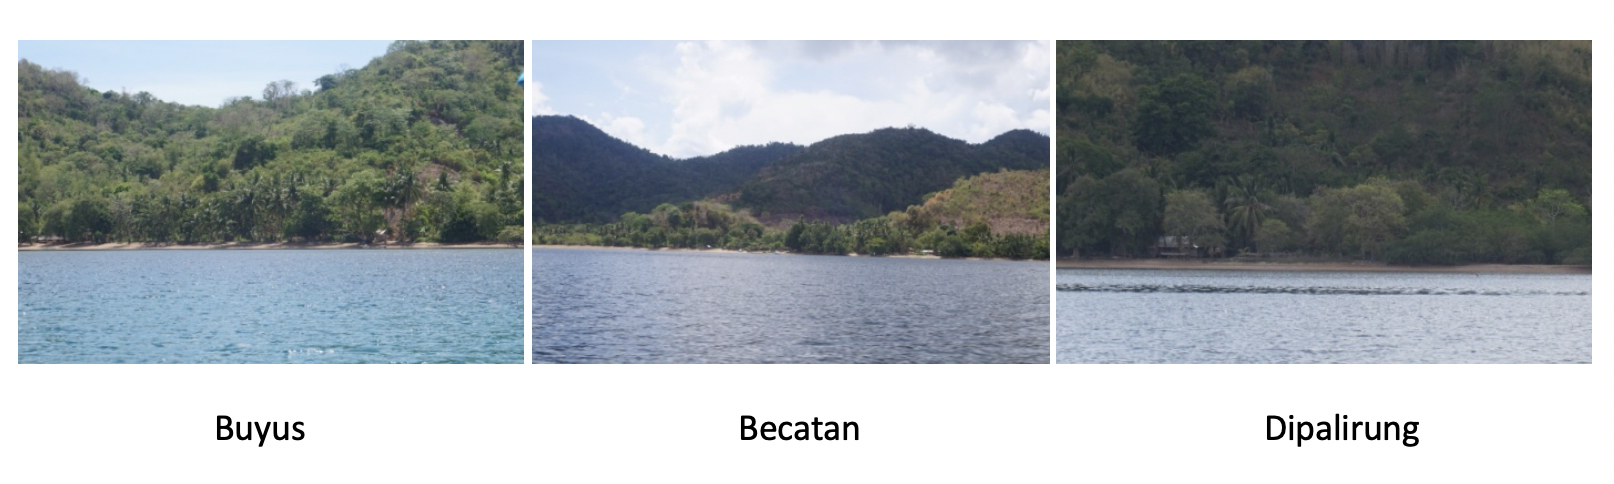 Buyus, Becatan, and Dipalirung are small island communities 